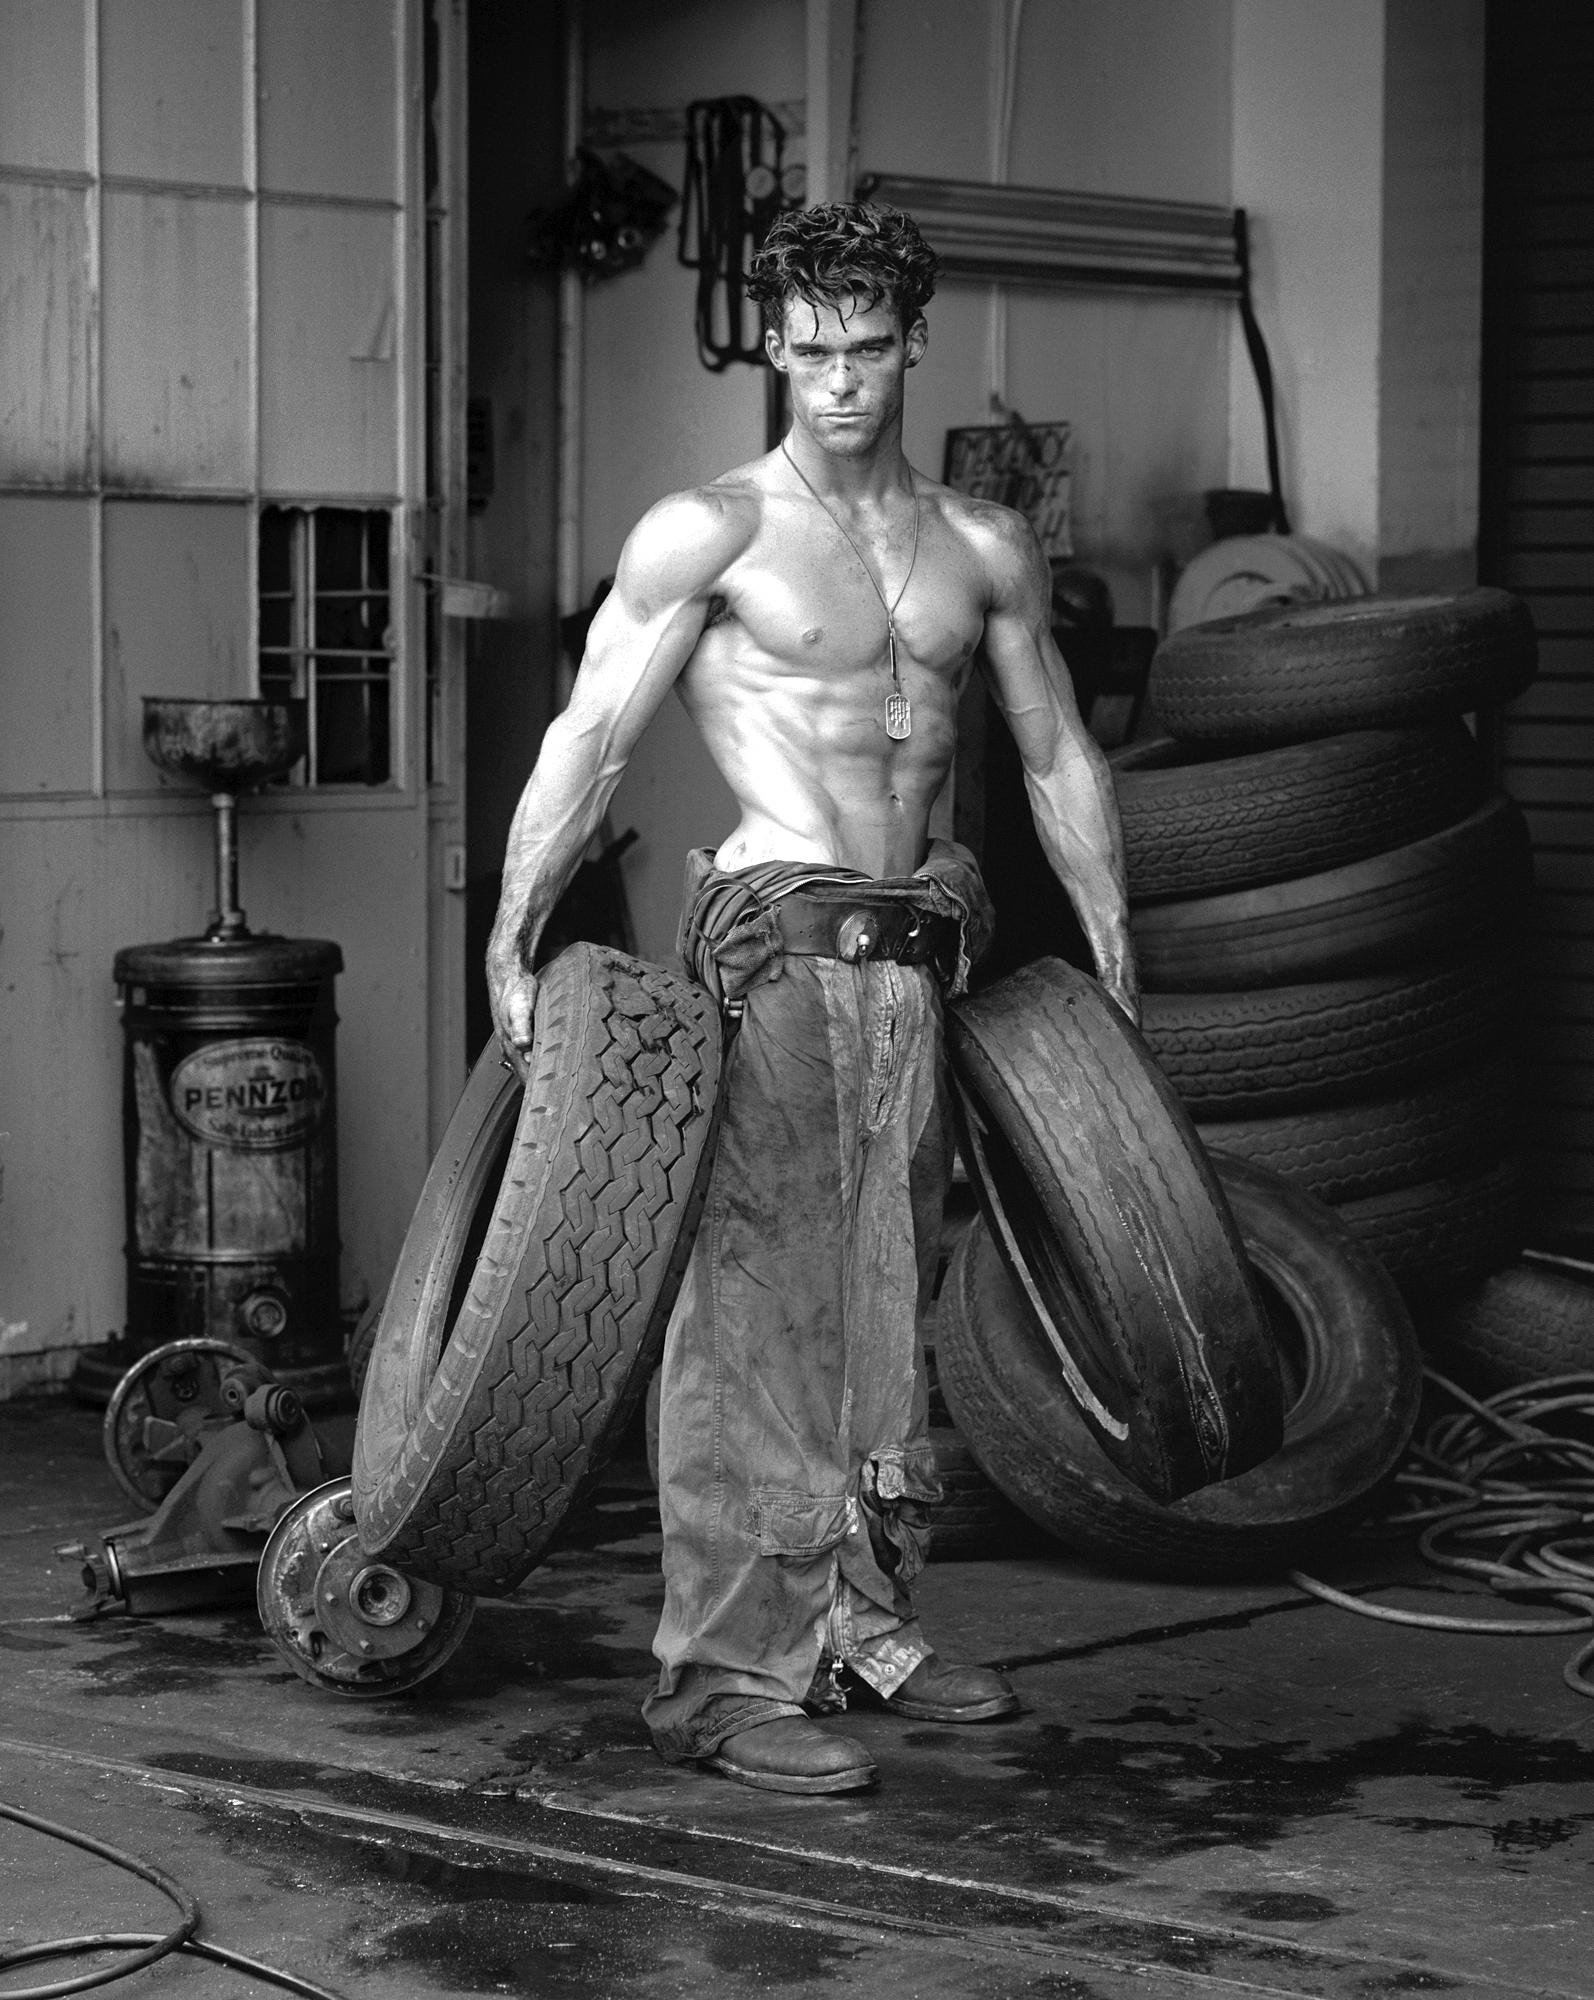 Fred with Tires, Hollywood - Photograph by Herb Ritts